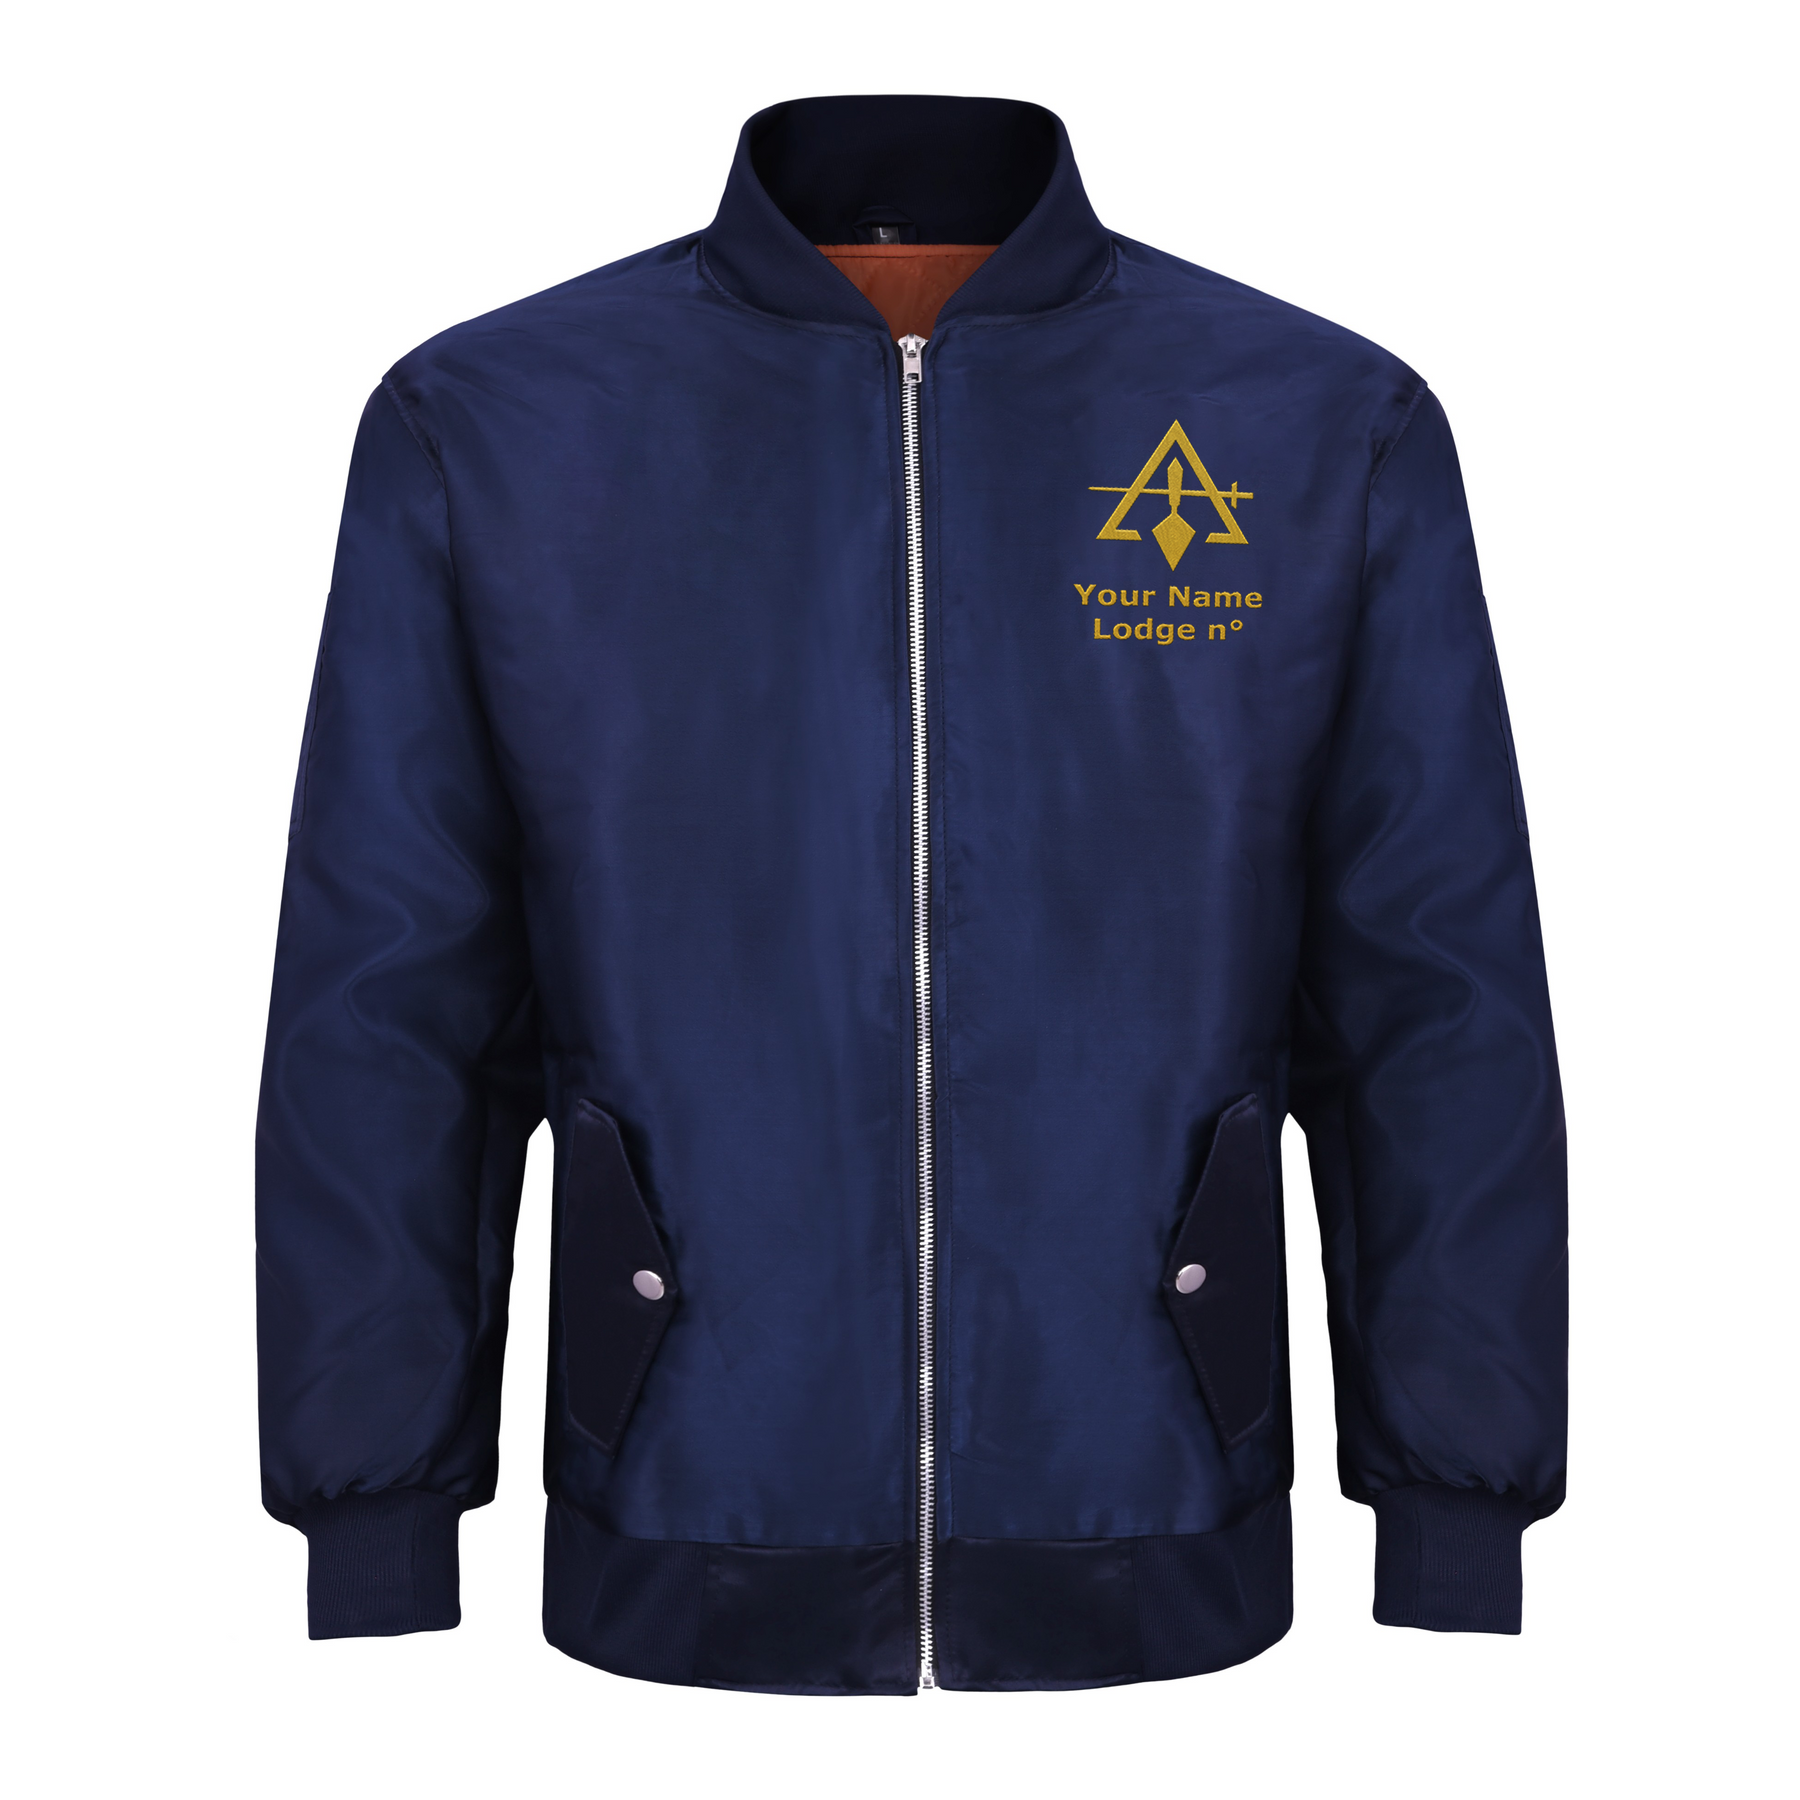 Council Jacket - Blue Color With Gold Embroidery - Bricks Masons